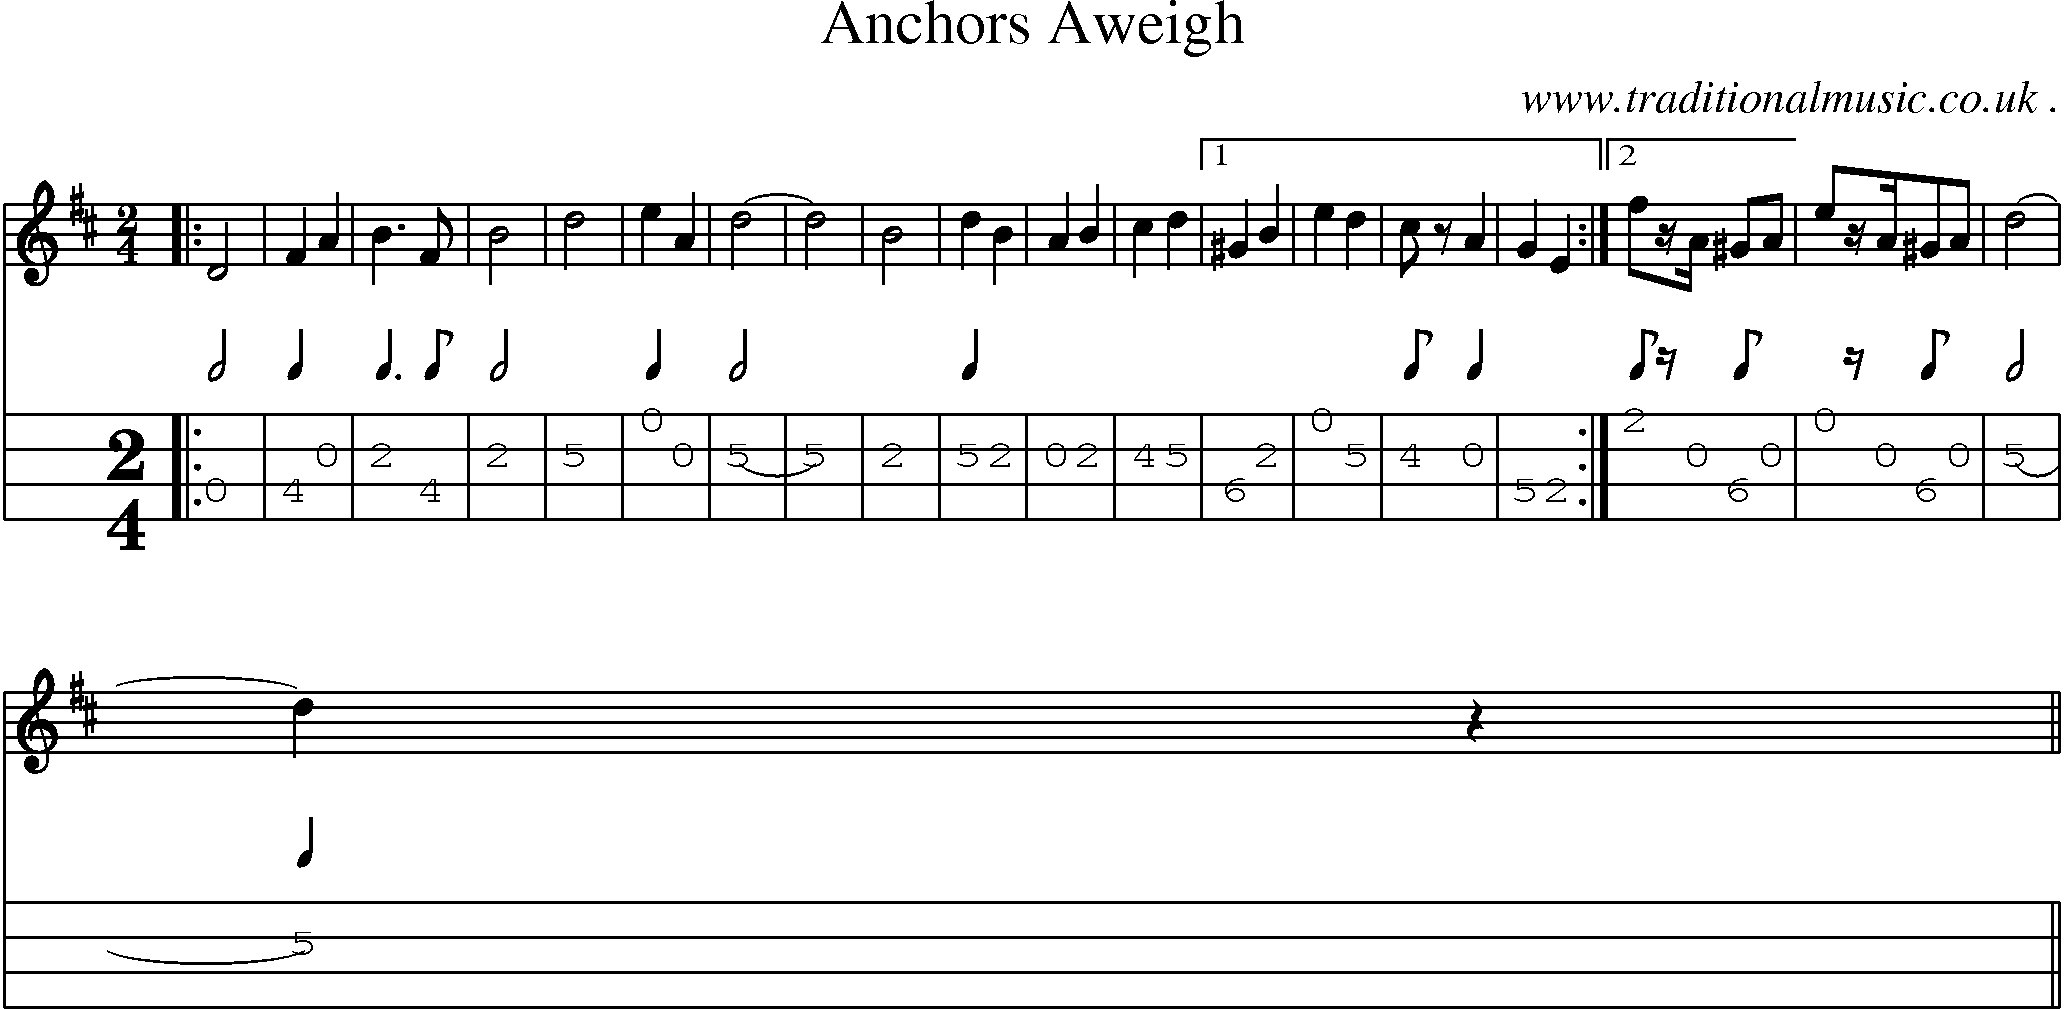 Music Score and Mandolin Tabs for Anchors Aweigh